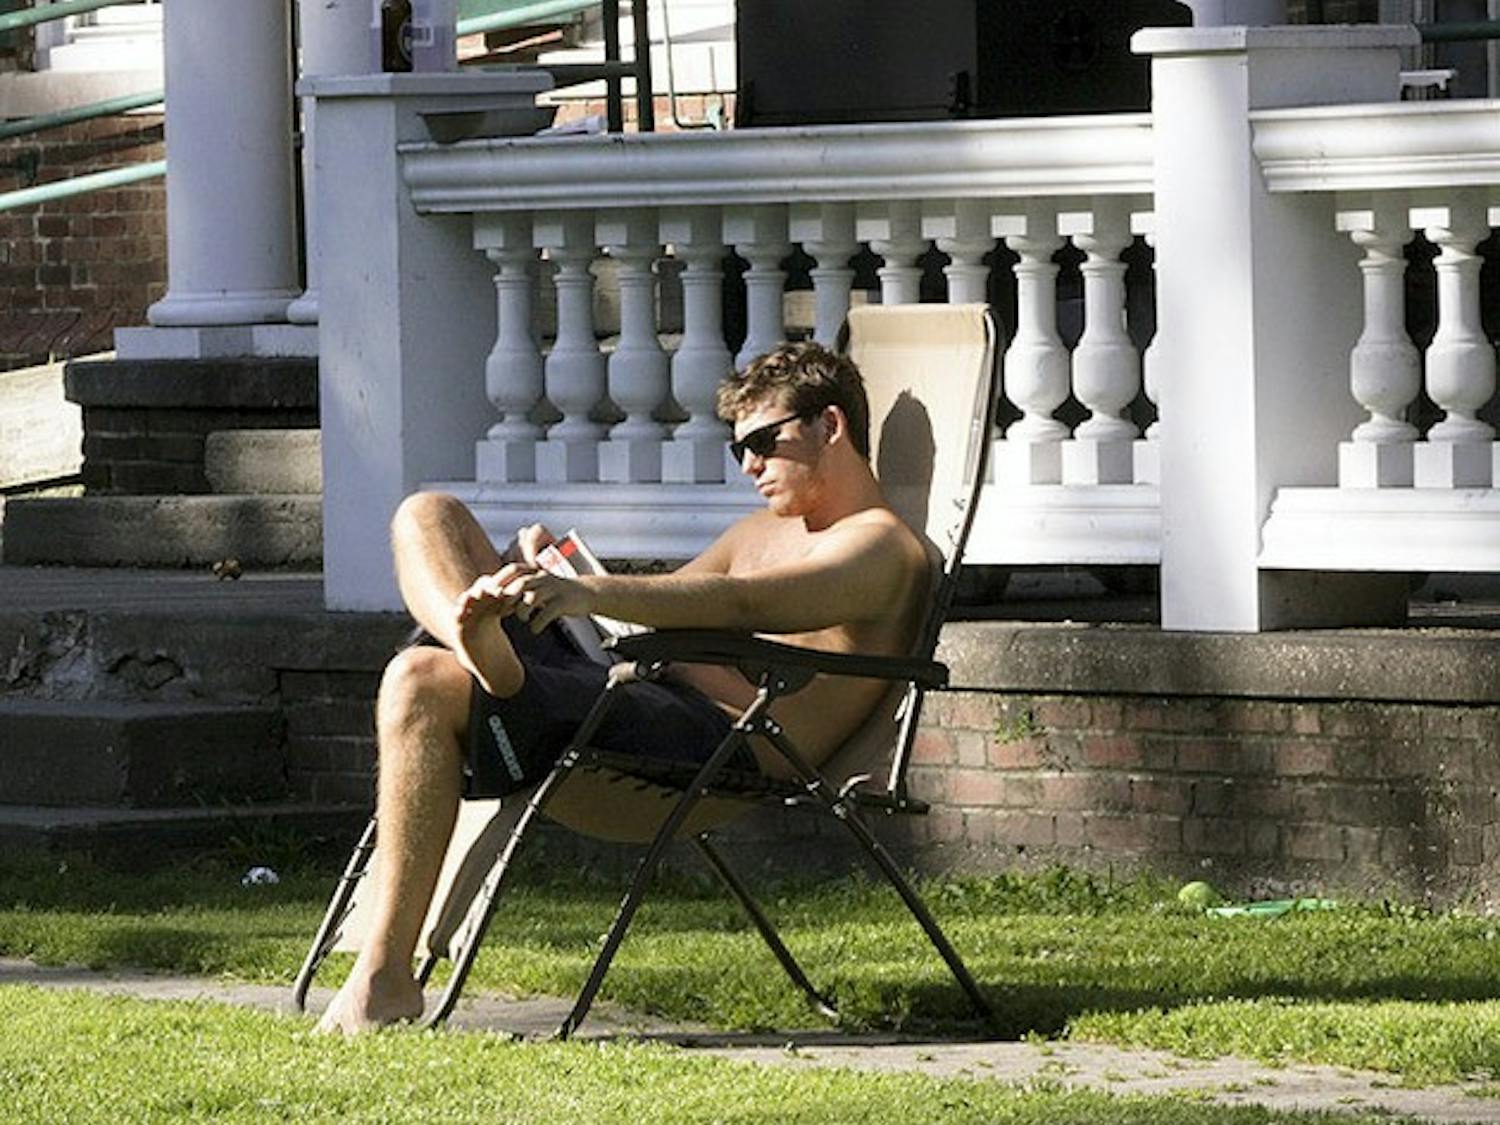 STUDYING, STUDYING YEAH: A sophomore enjoys the summer sun outside of Alpha Delta fraternity doing some reading.